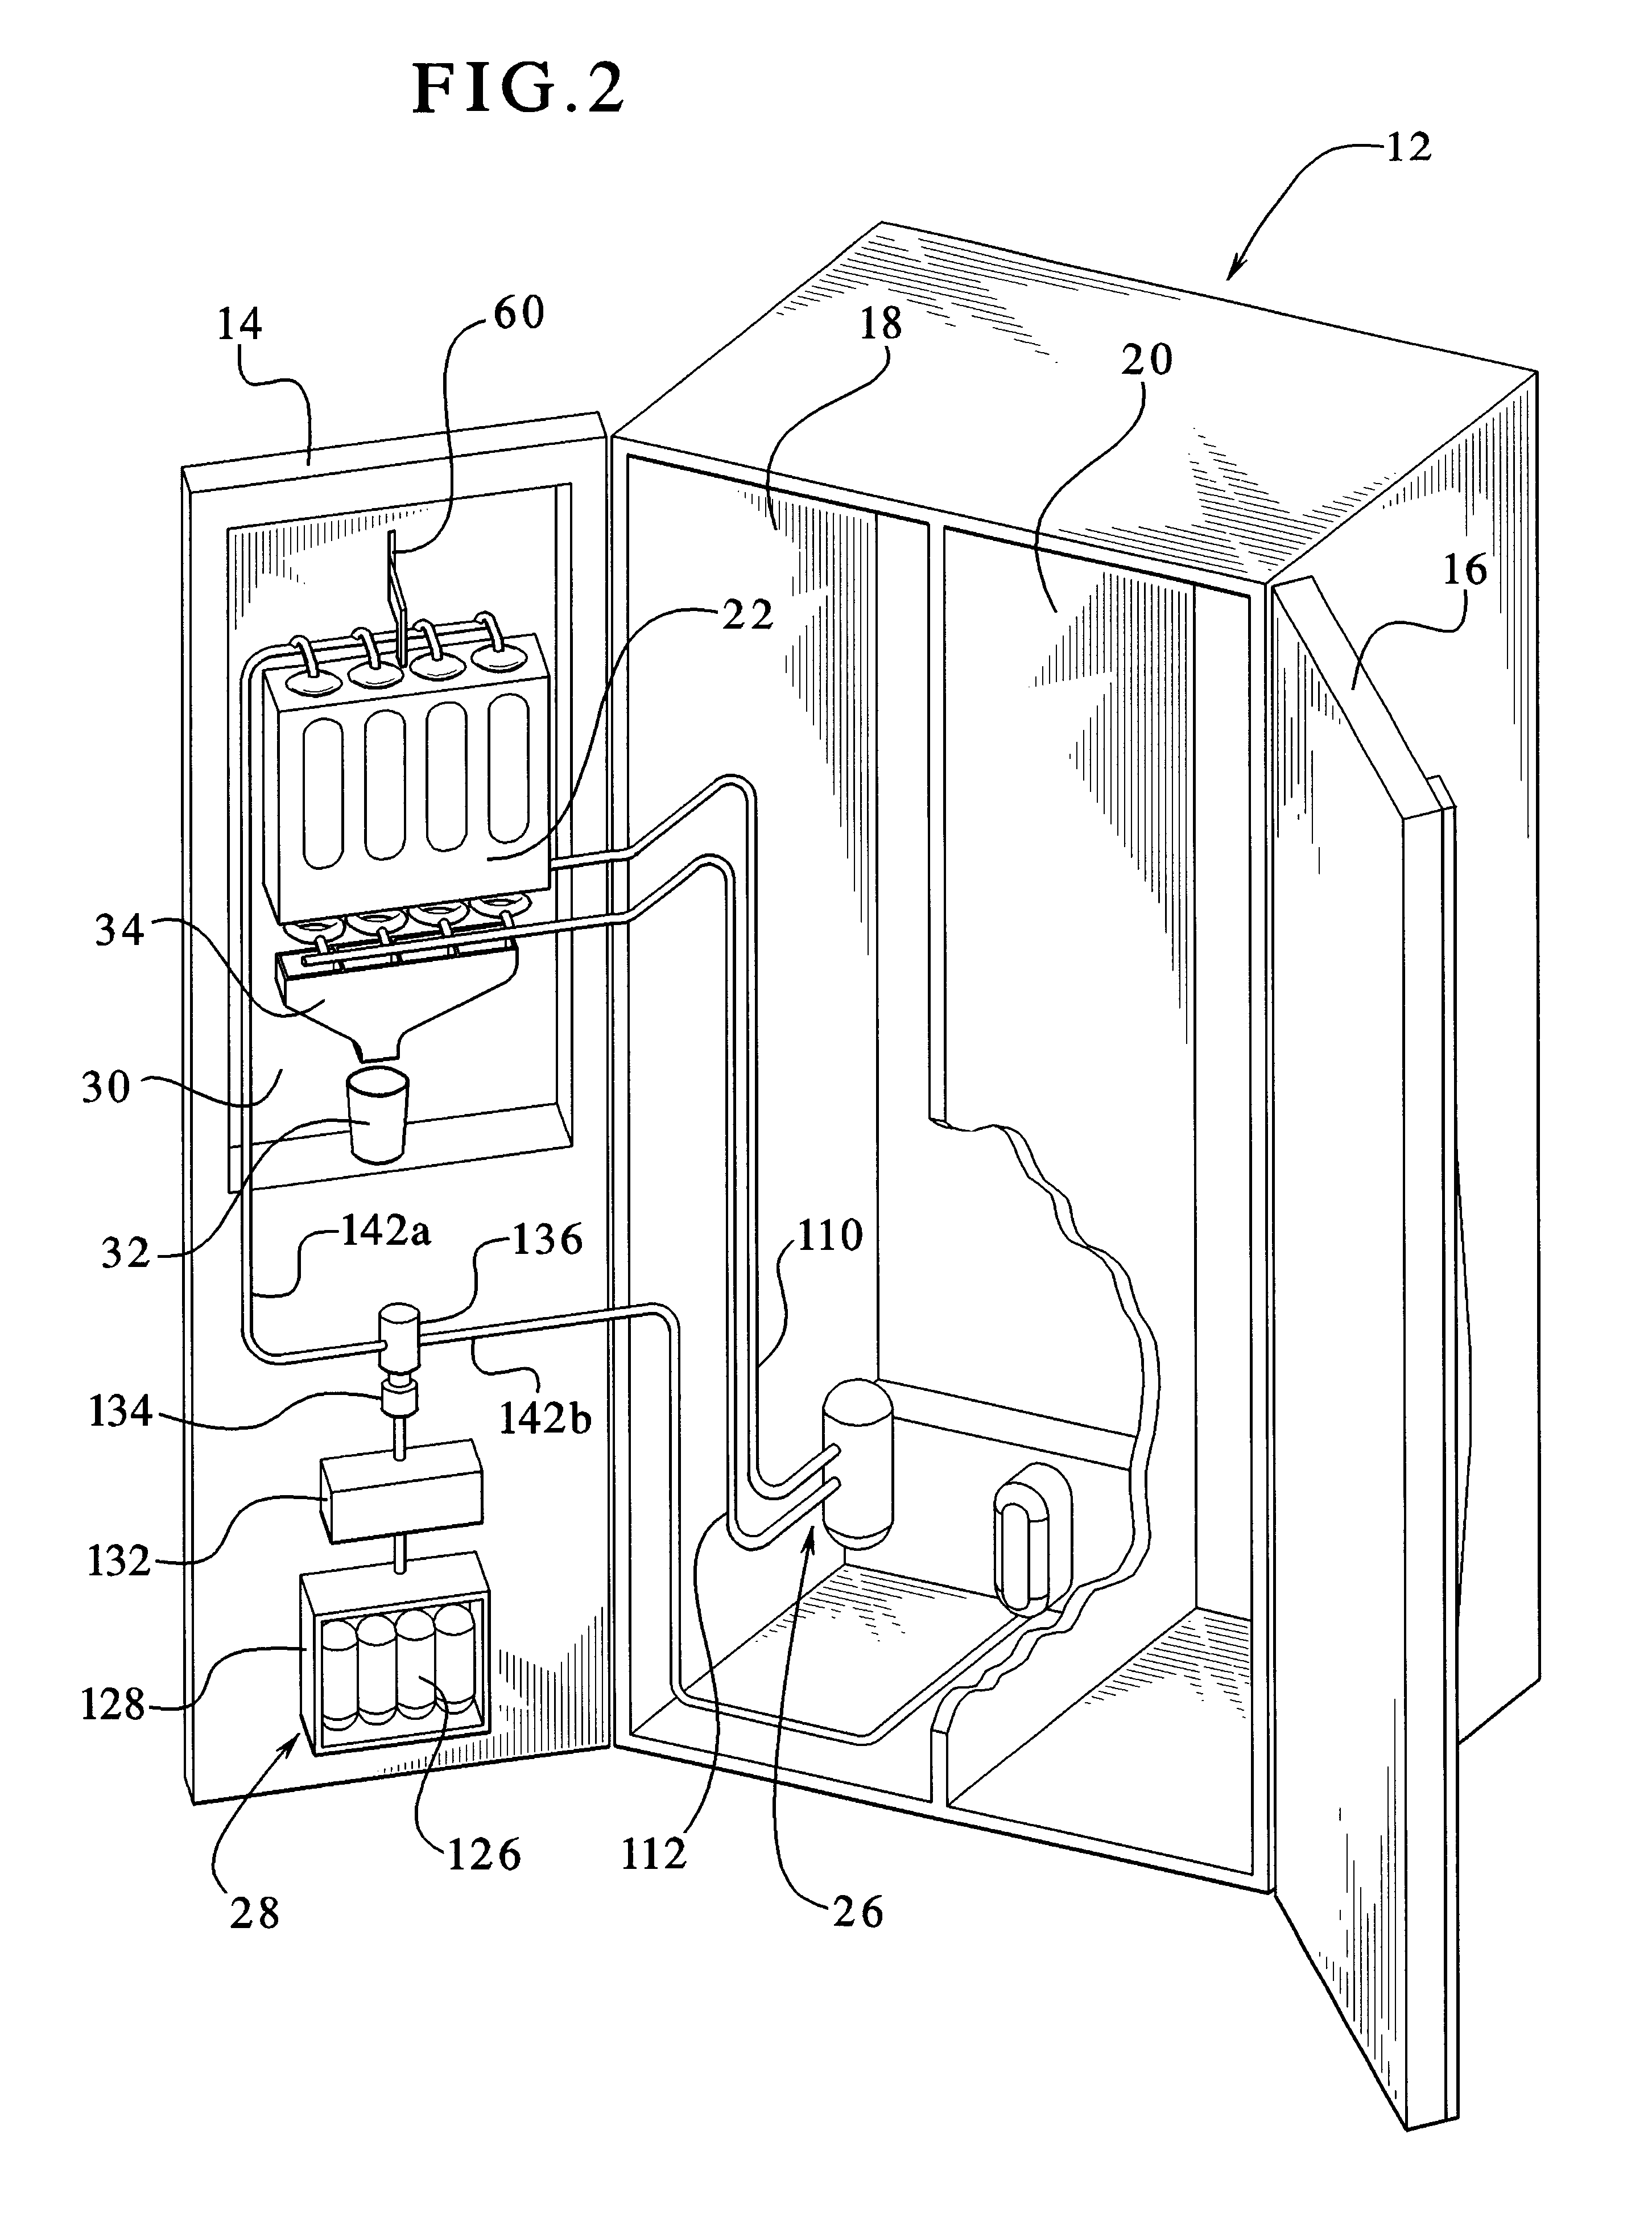 Beverage dispensing apparatus having carbonated and non-carbonated water supplier